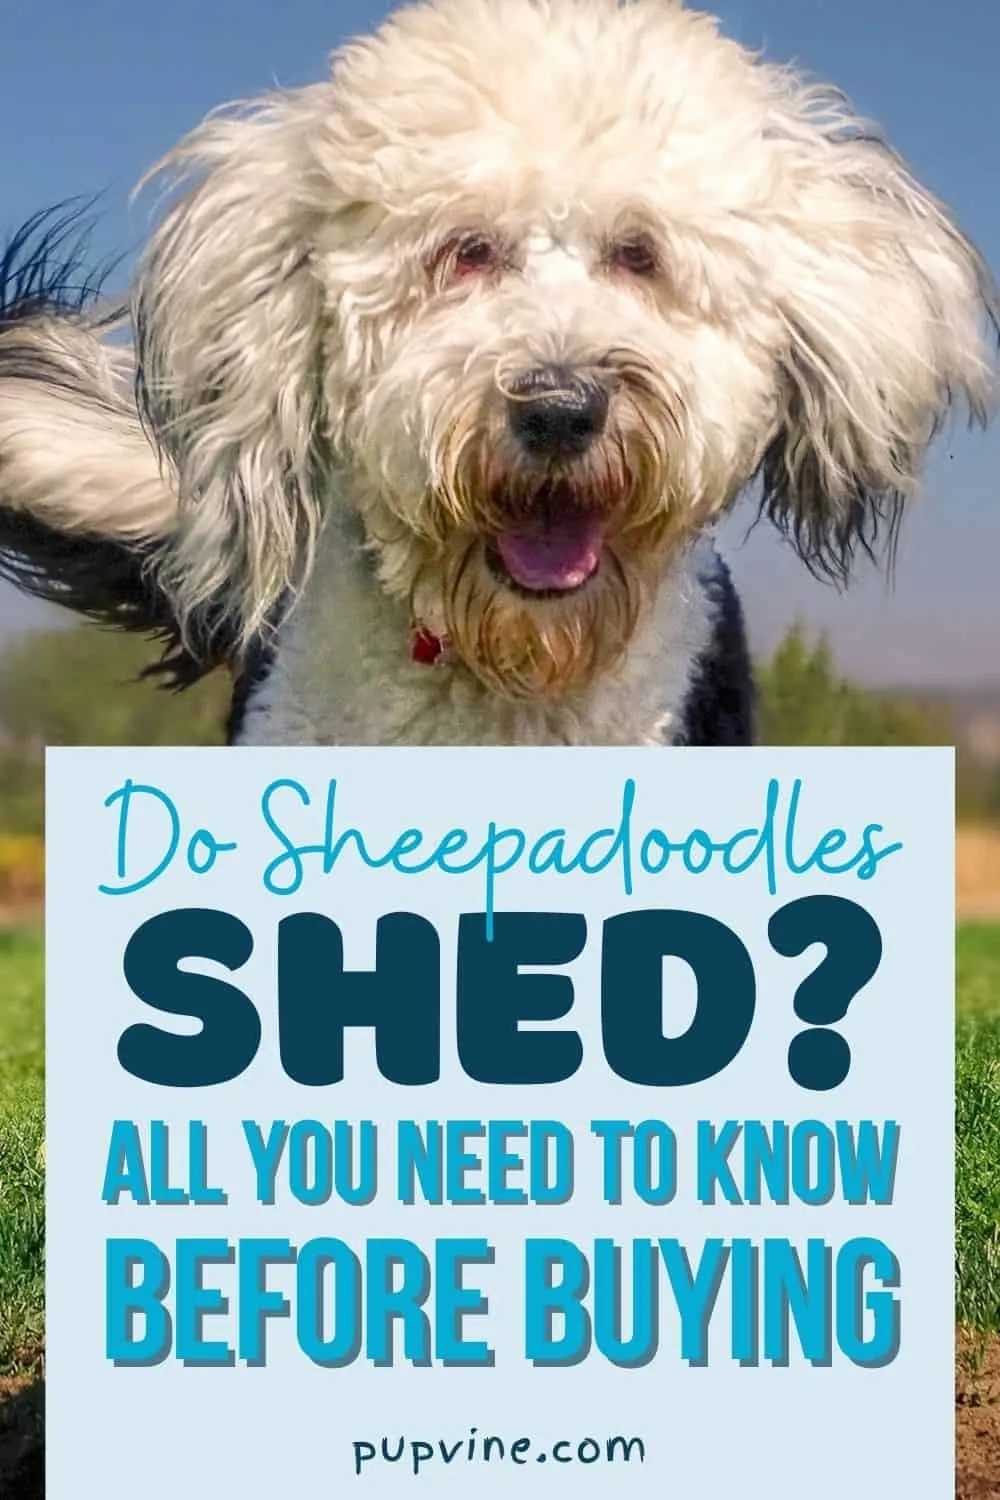 Do Sheepadoodles Shed? All You Need To Know Before Buying